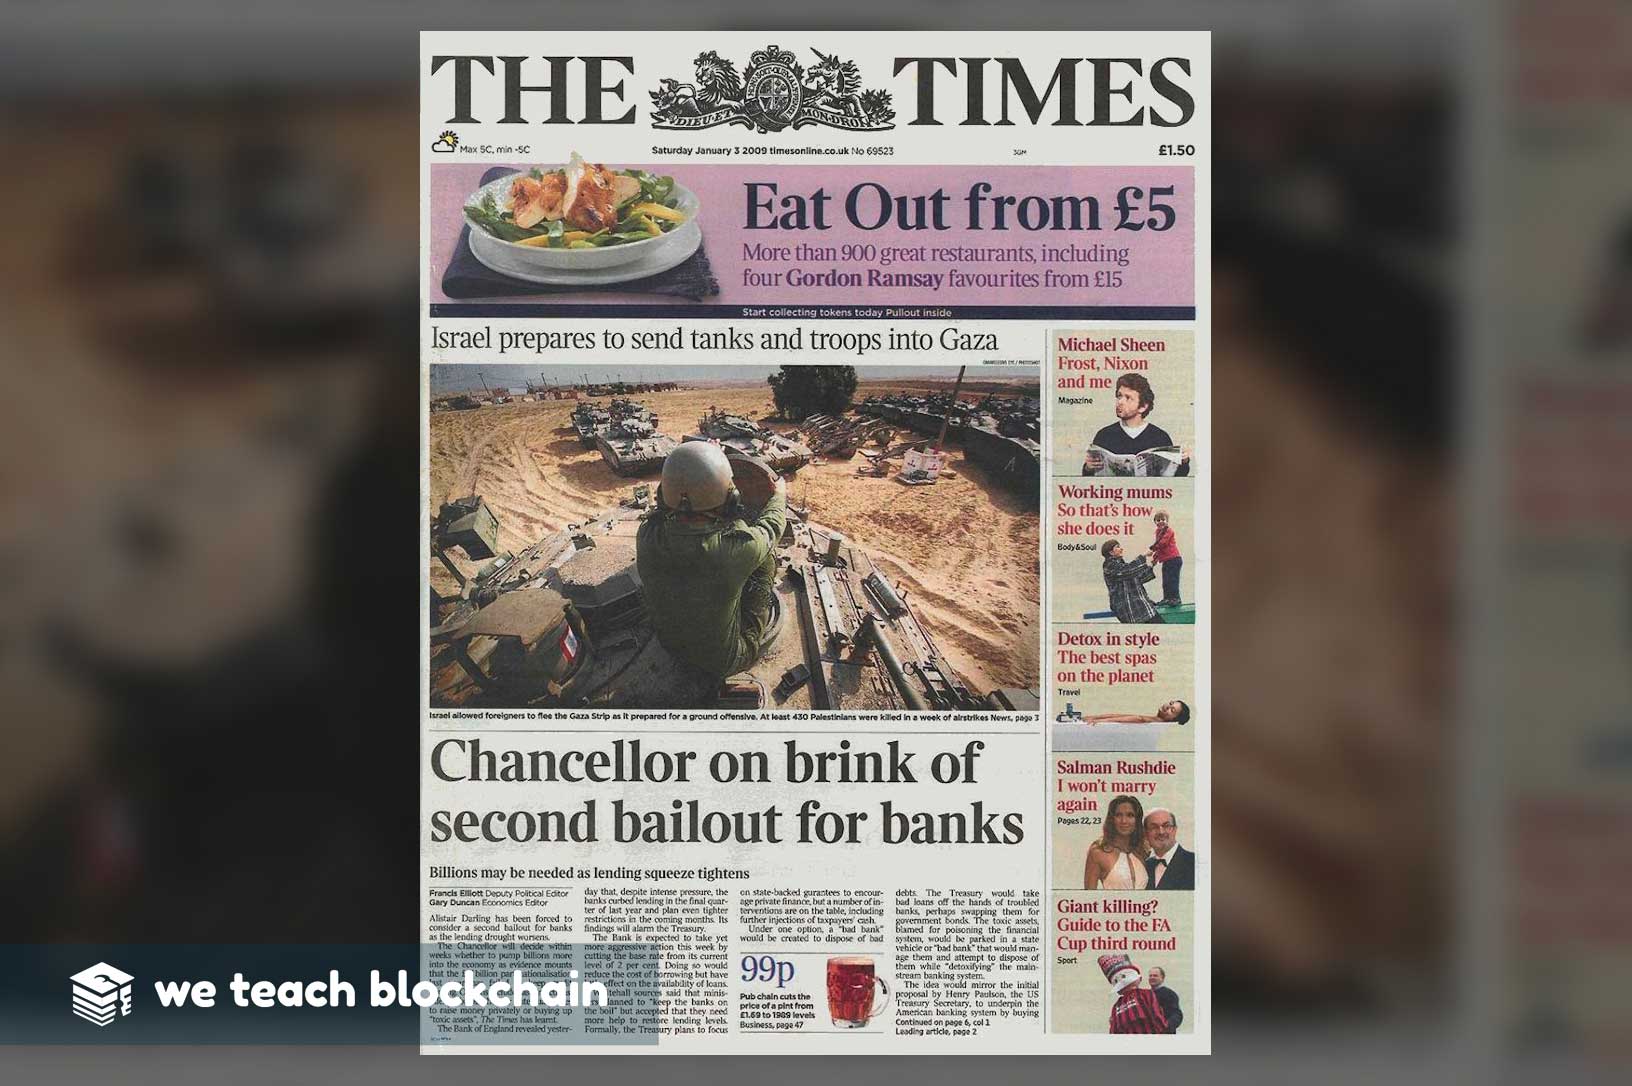 The Times' front page on bailouts